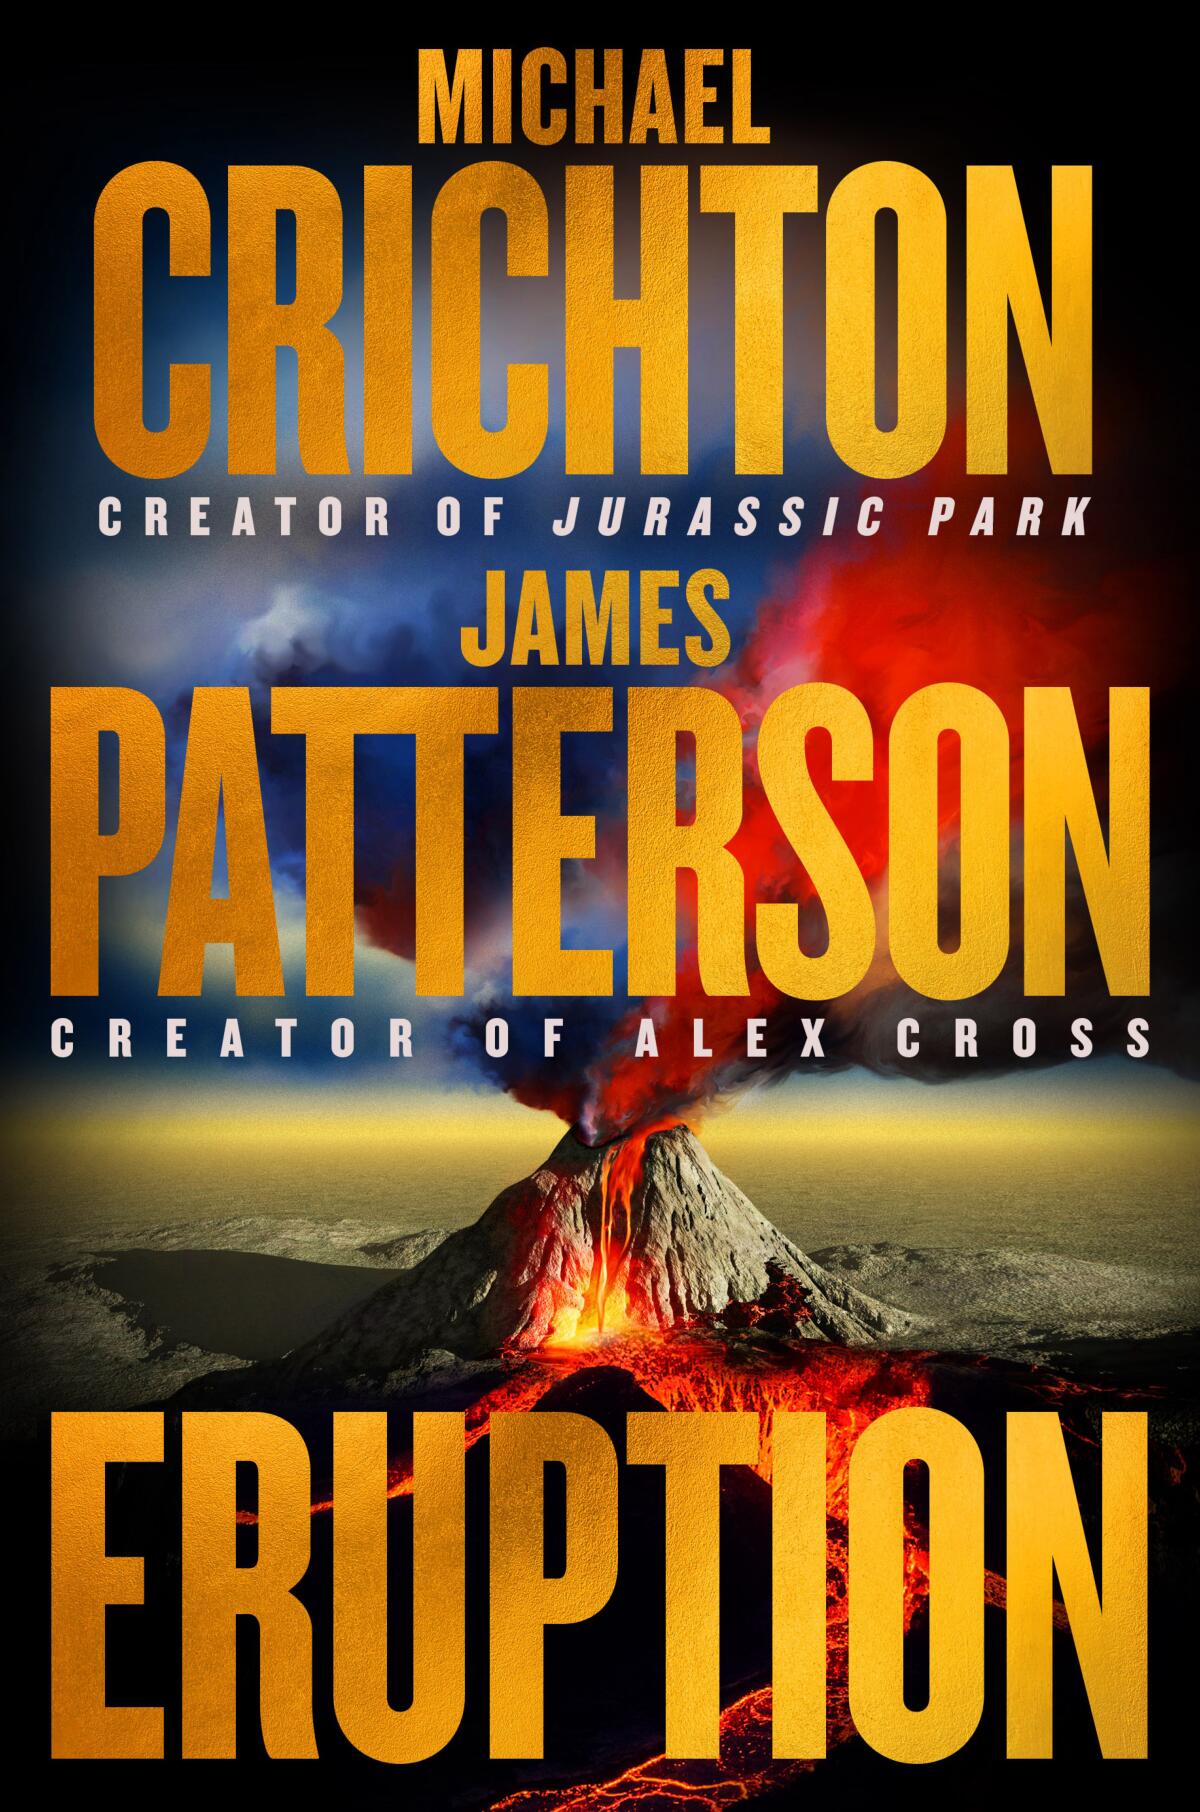 "Eruption" by Michael Crichton and James Patterson